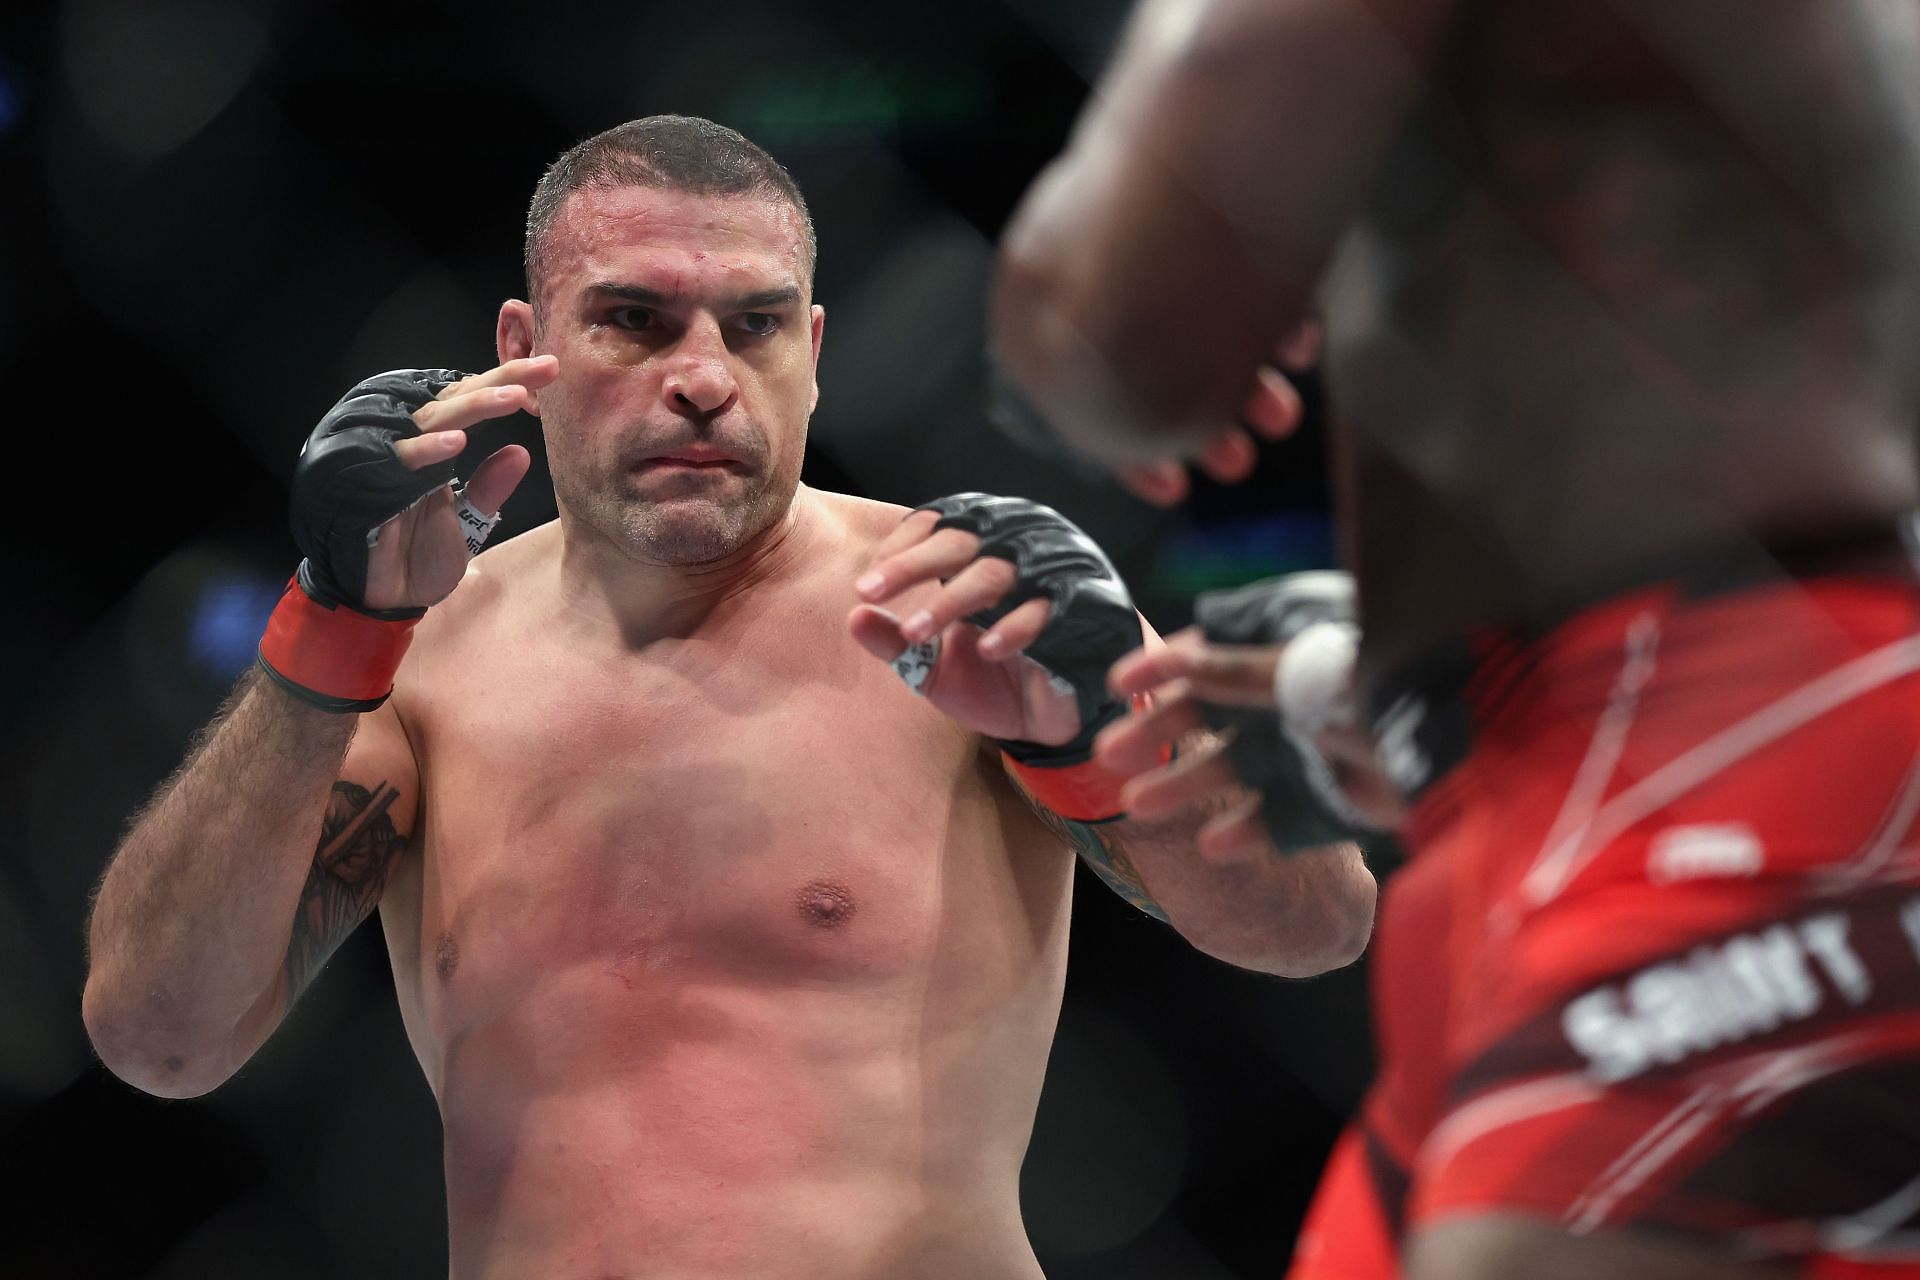 Former PRIDE Champion Shogun Rua is definitely in contention for the GOAT light heavyweight title